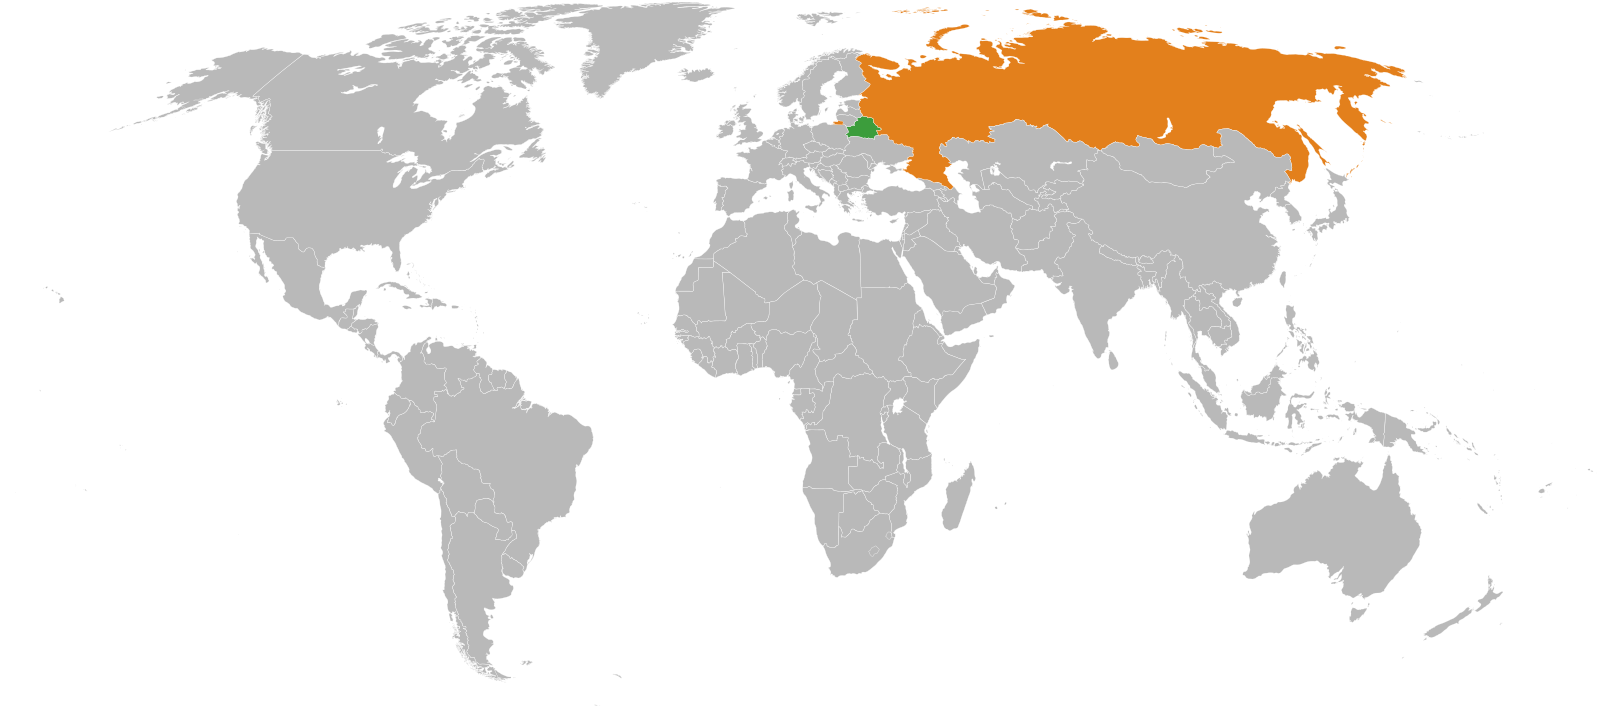 The Union State of Russia and Belarus at the present stage